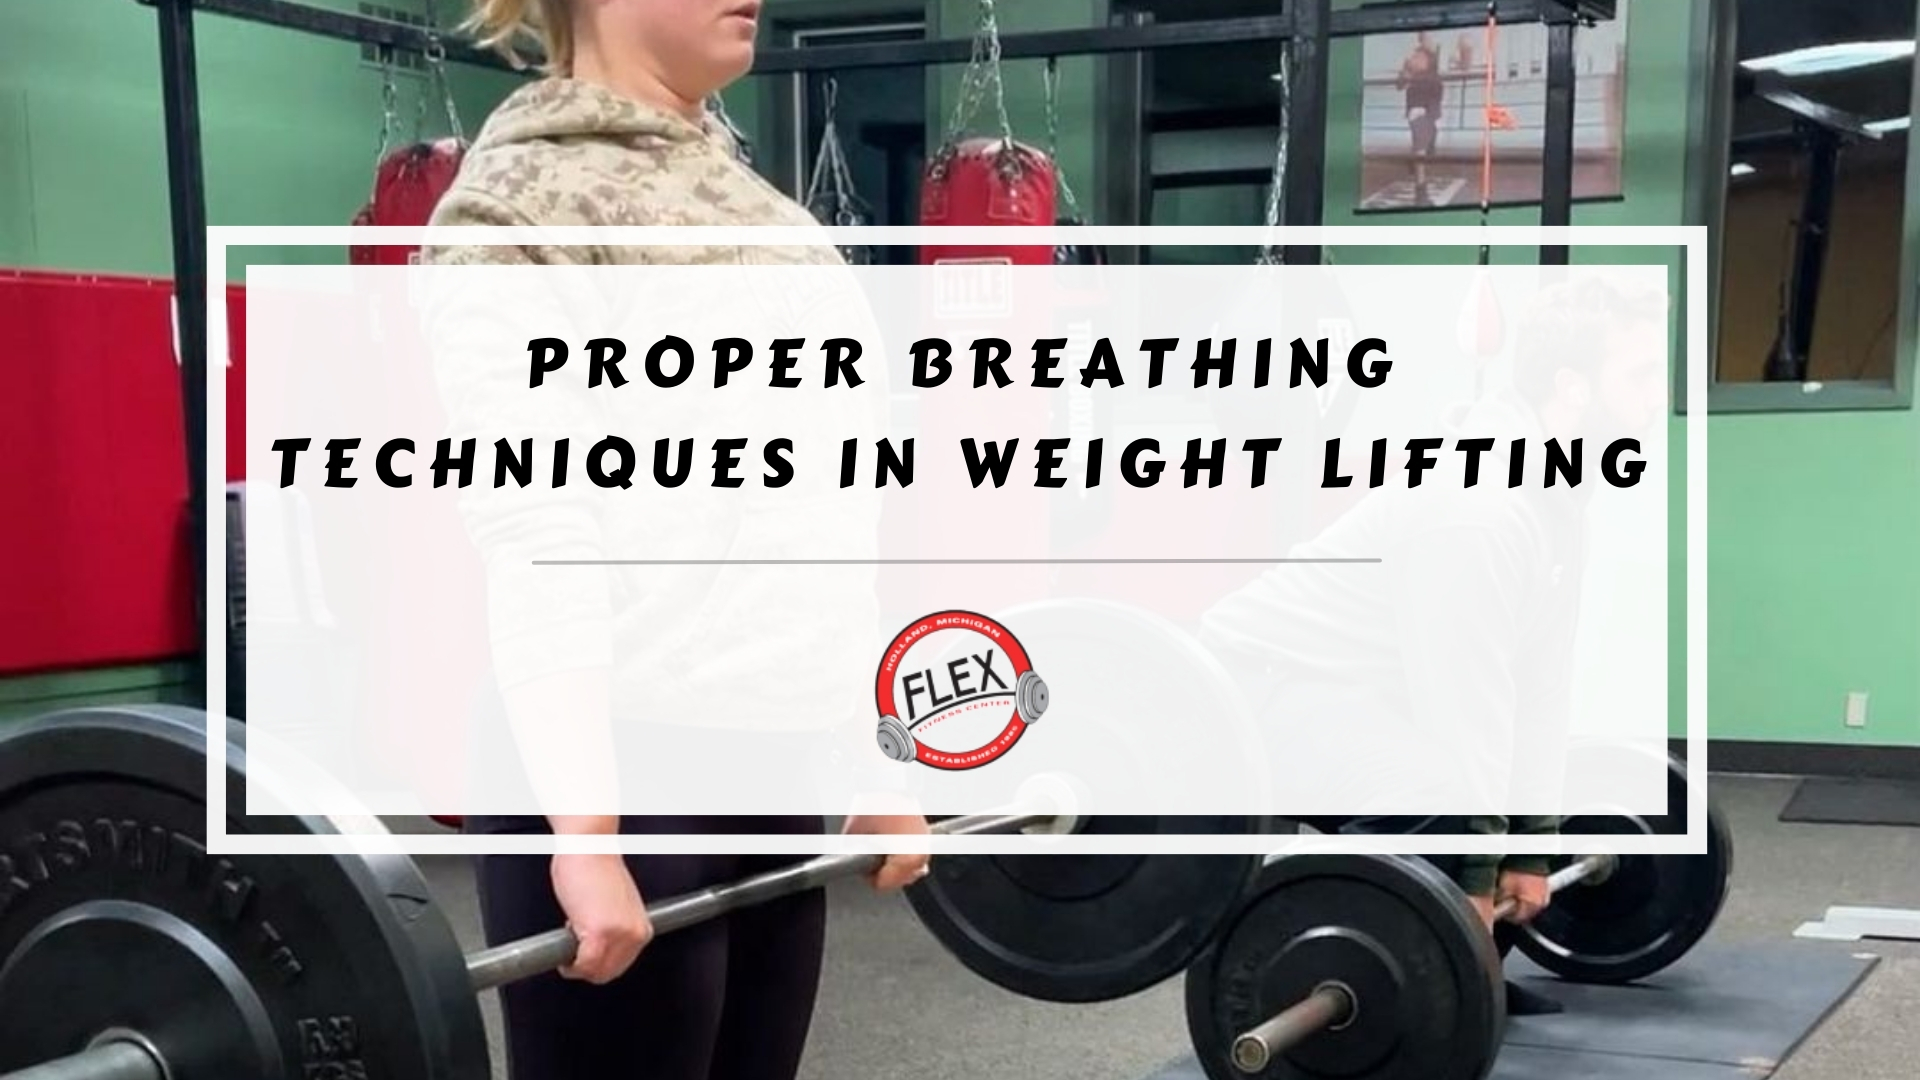 Featured image of proper breathing techniques in weight lifting